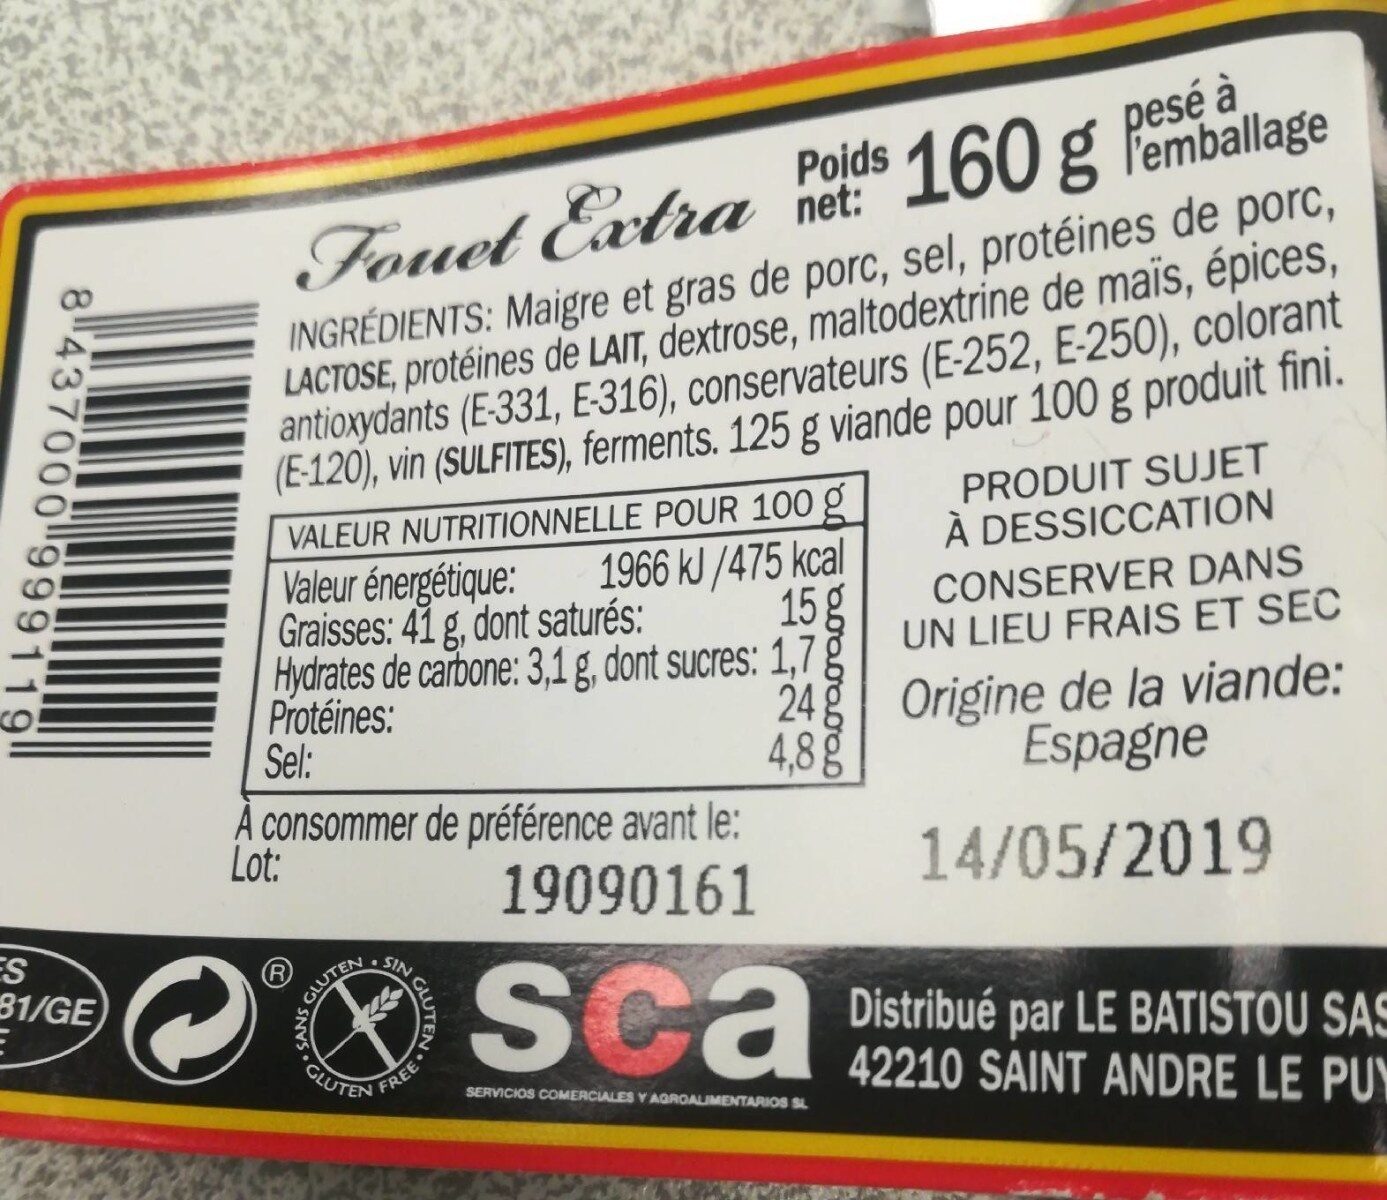 Fouet Extra "Le Catalan" - Nutrition facts - fr